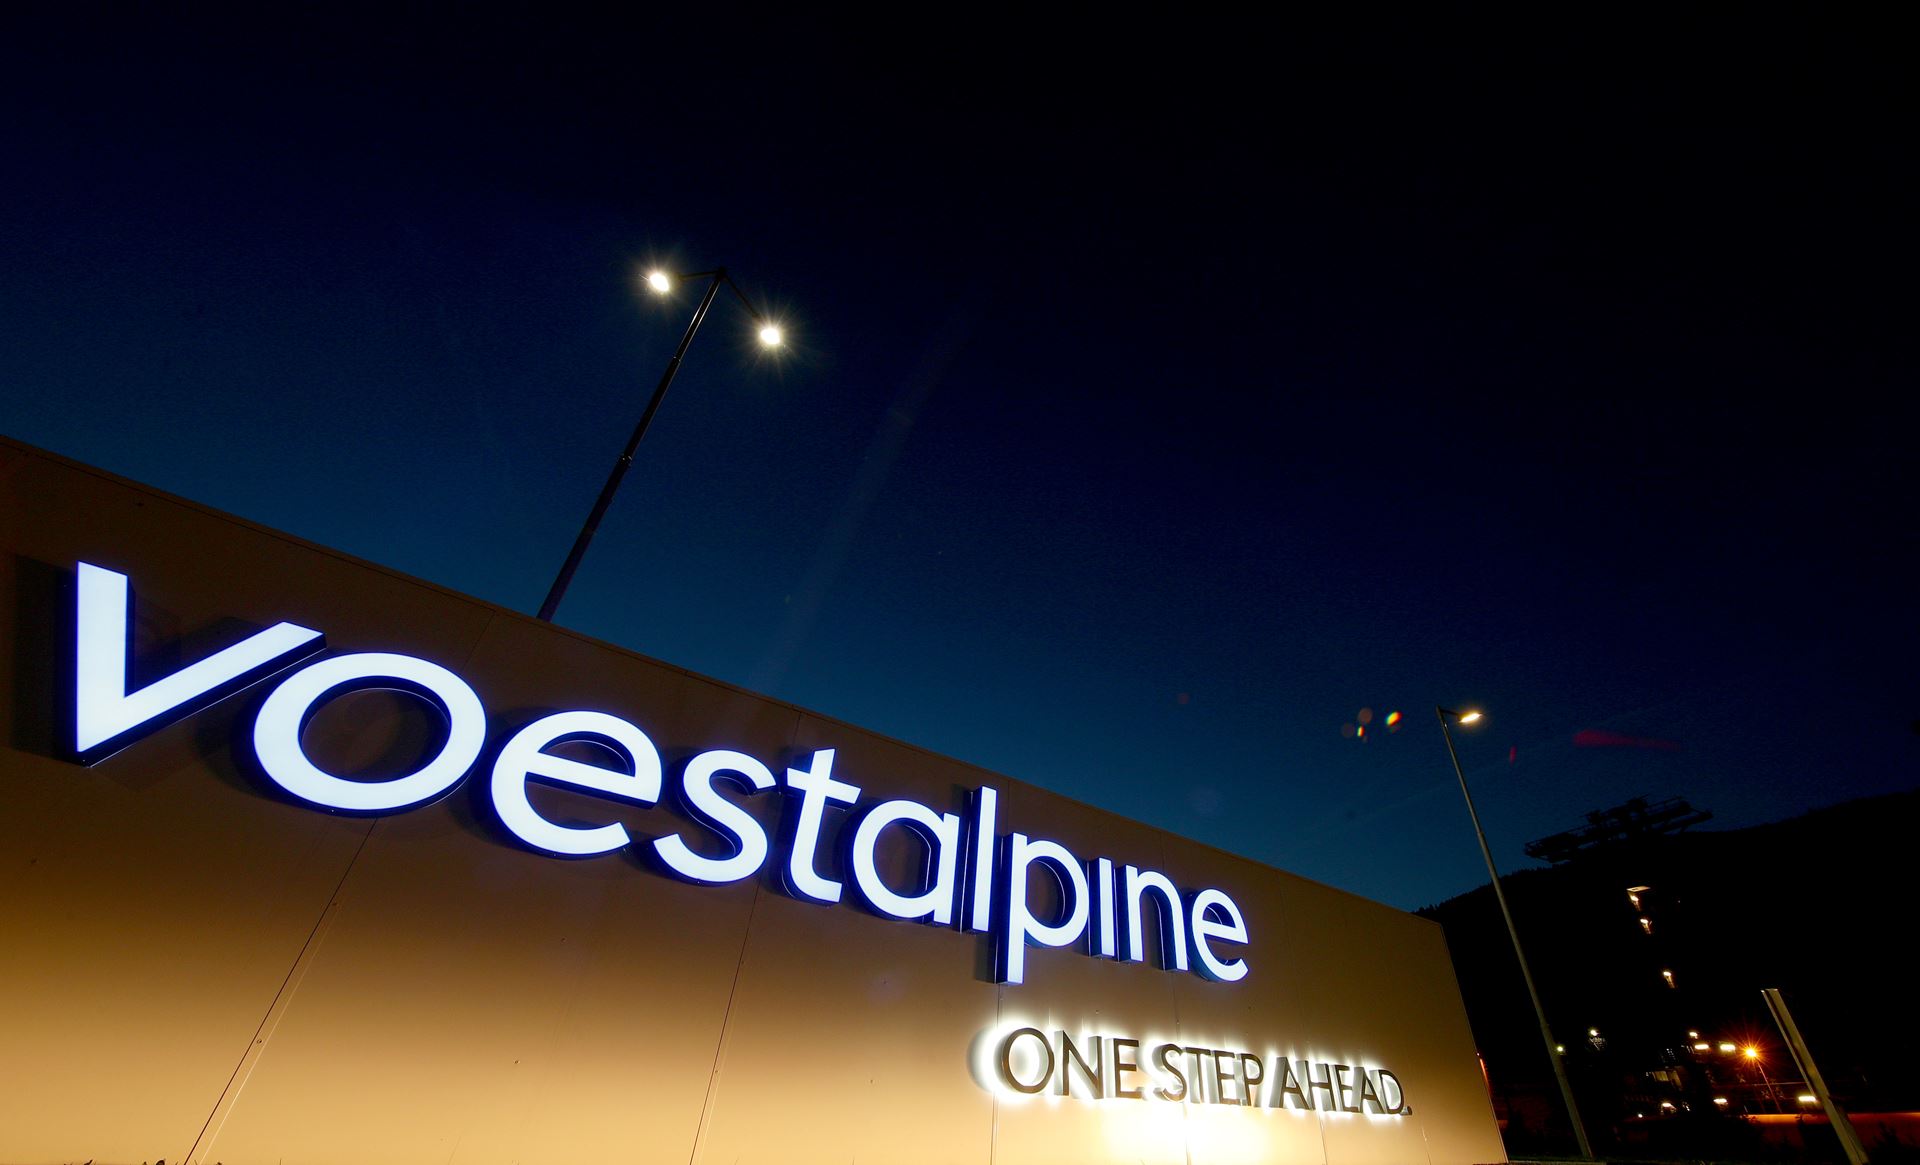 Voestalpine plans to use clean electricity for steel production in the future